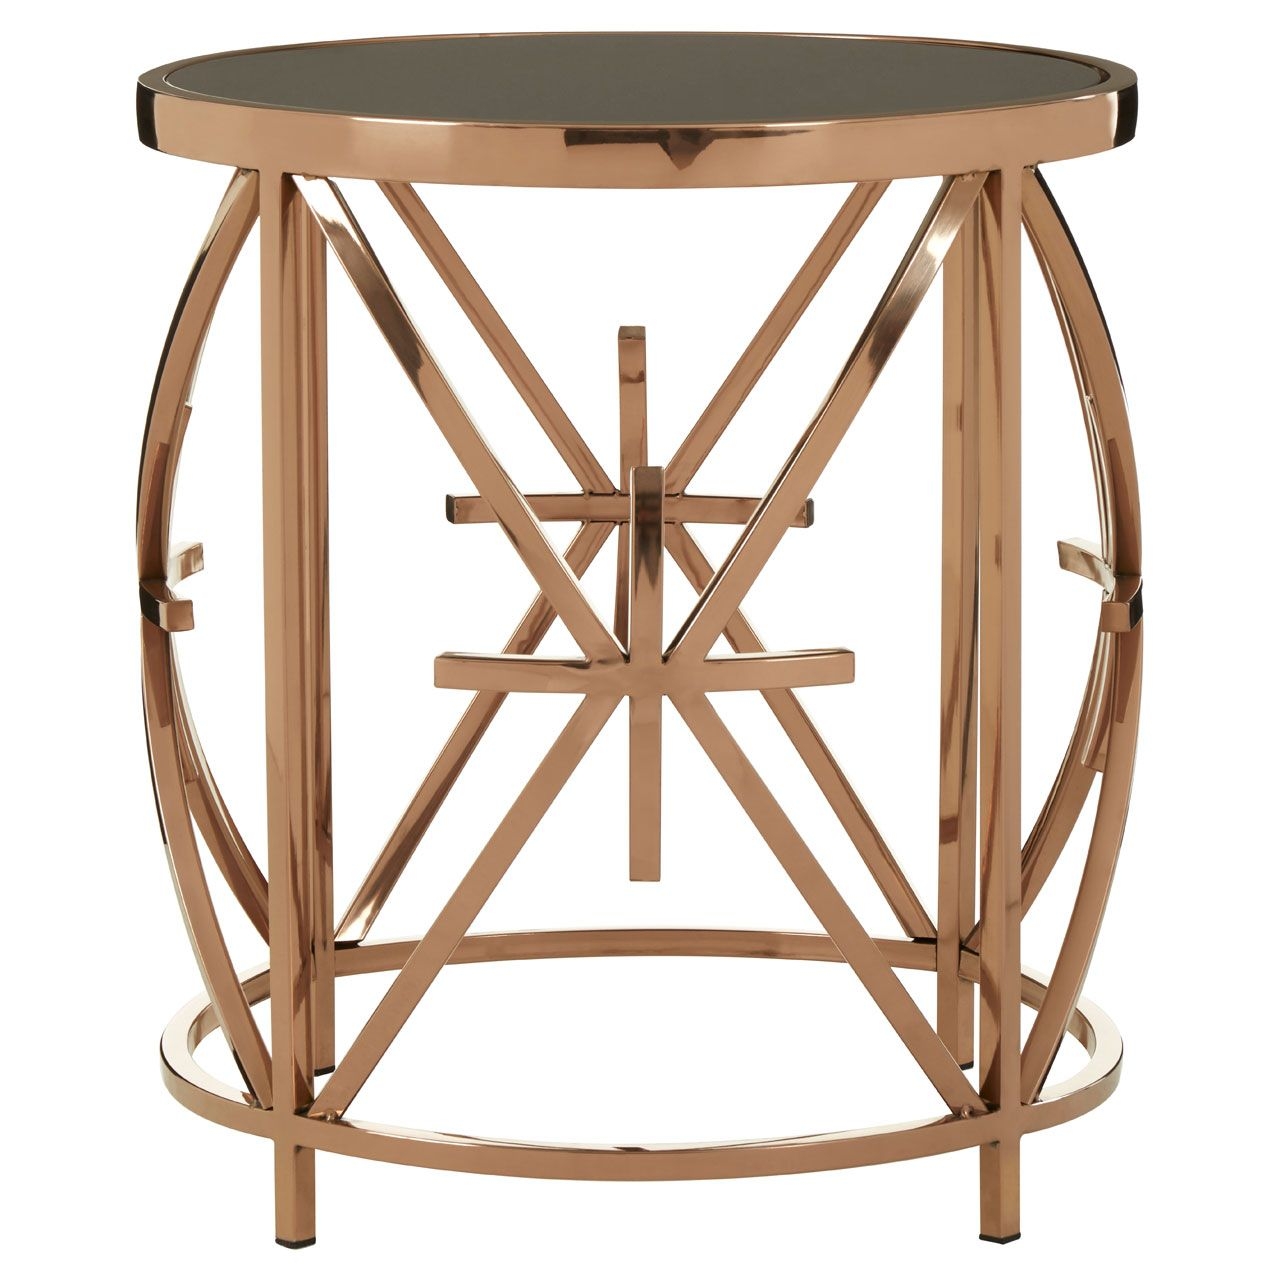 Tula Round Black Glass Side Table With Rose Gold Stainless Steel Base